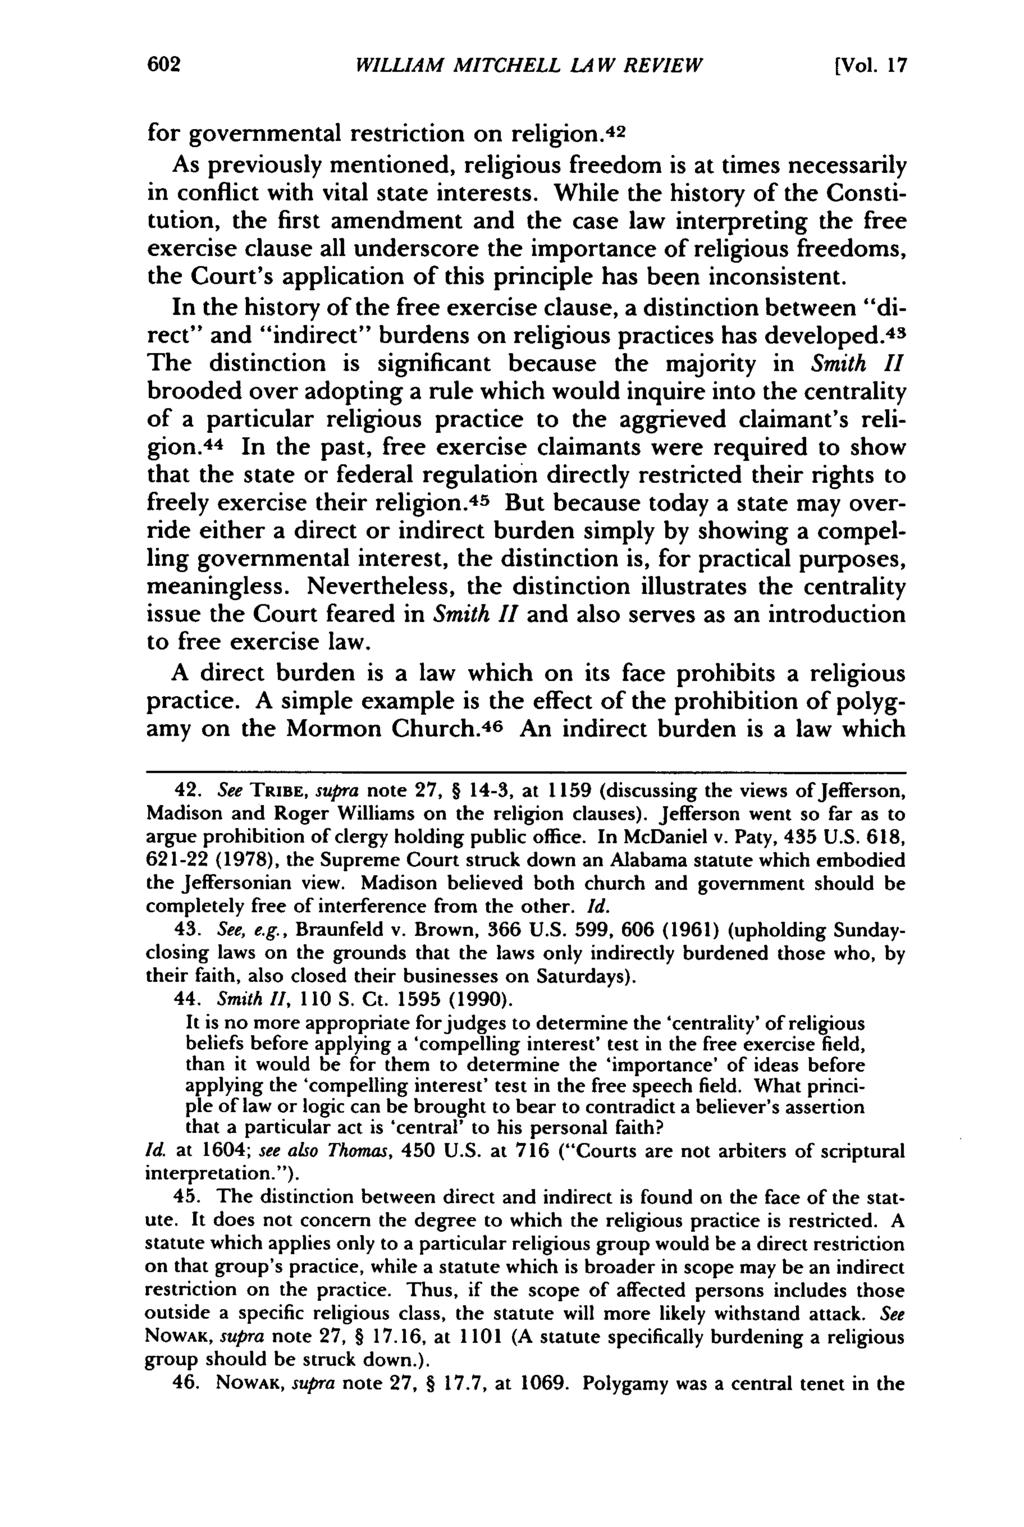 William Mitchell WILLIAM Law Review, MITCHELL Vol. 17, LAW Iss. 2 [1991], REVIEW Art. 16 [Vol. 17 for governmental restriction on religion.